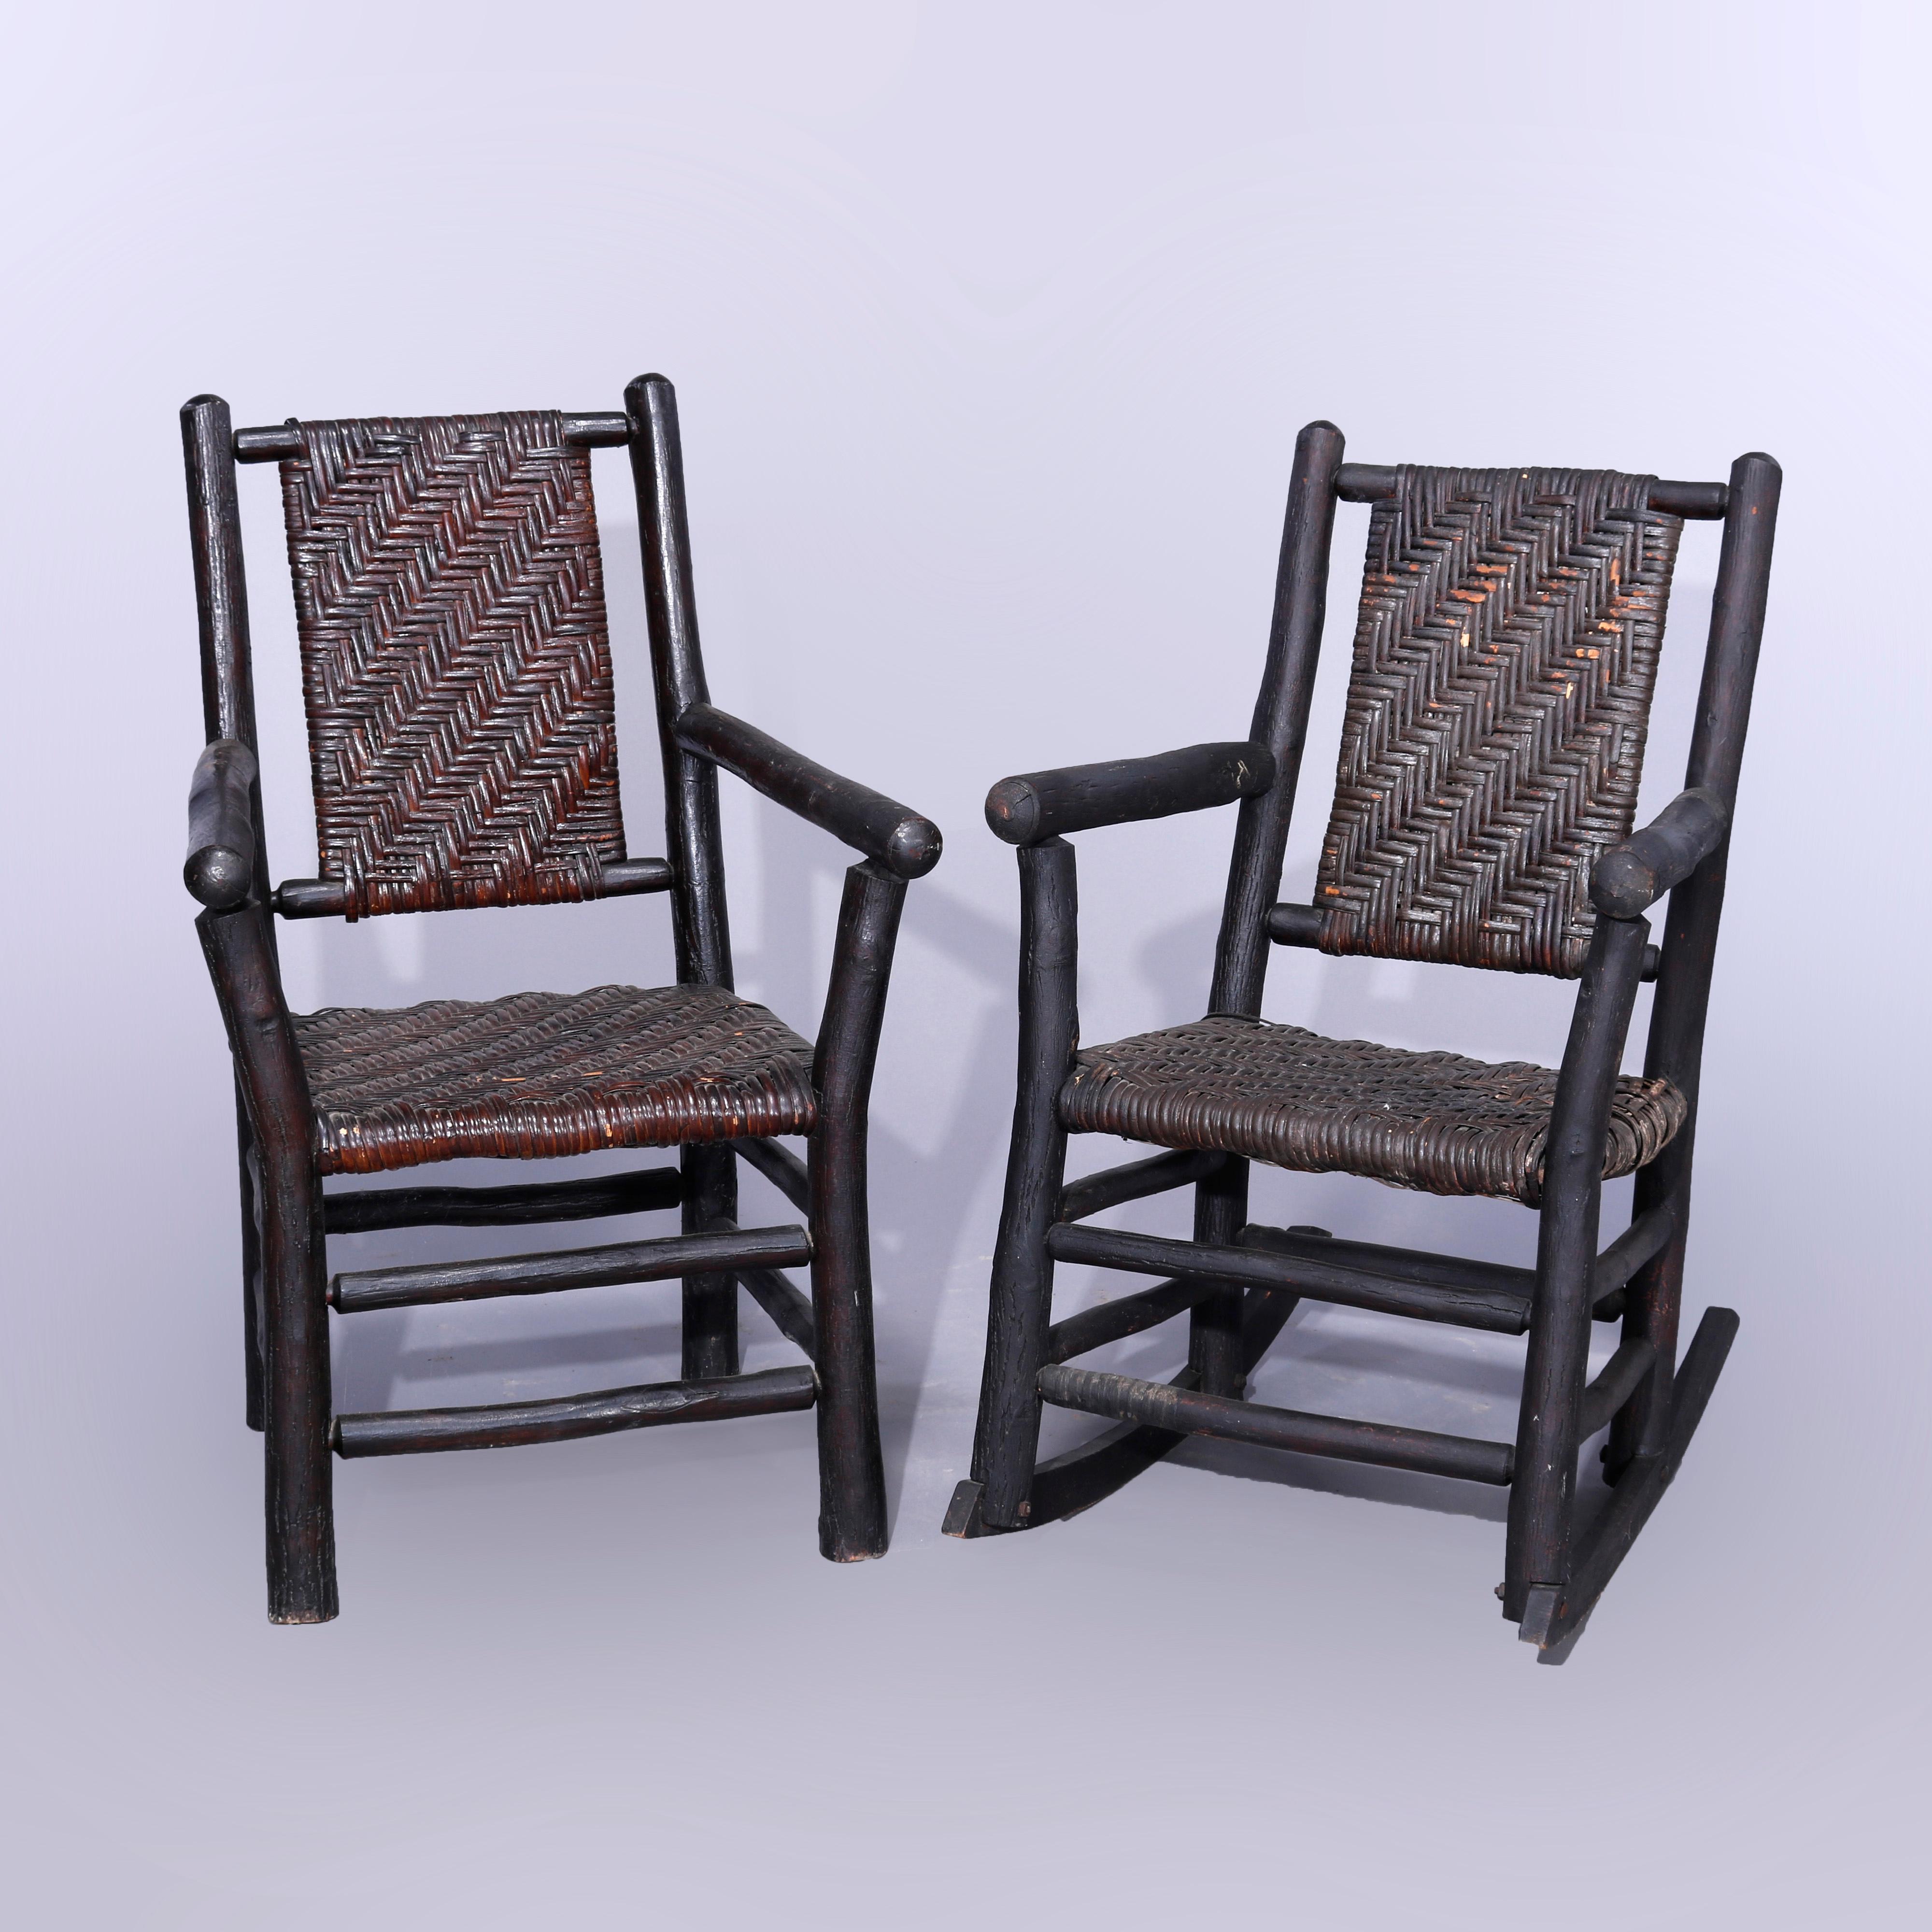 An antique Adirondack chair and rocker set in the manner of Old Hickory offer stick form frames with woven reed seats and backs, c1920

Measures - chair 36'' H x 23.75'' W x 24'' D, seat height 15.5